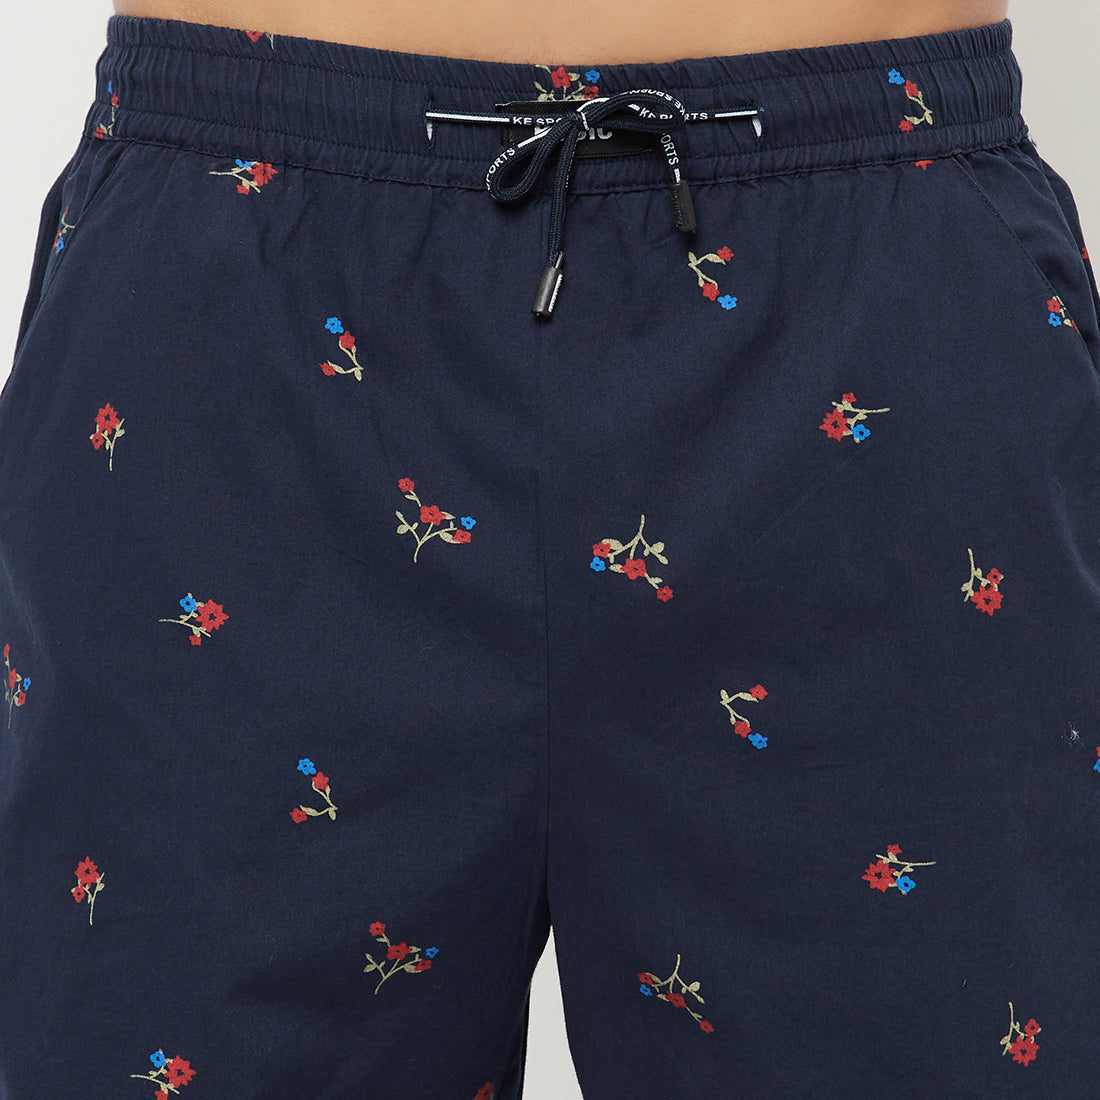 The Co-ords <br> in Summer Navy